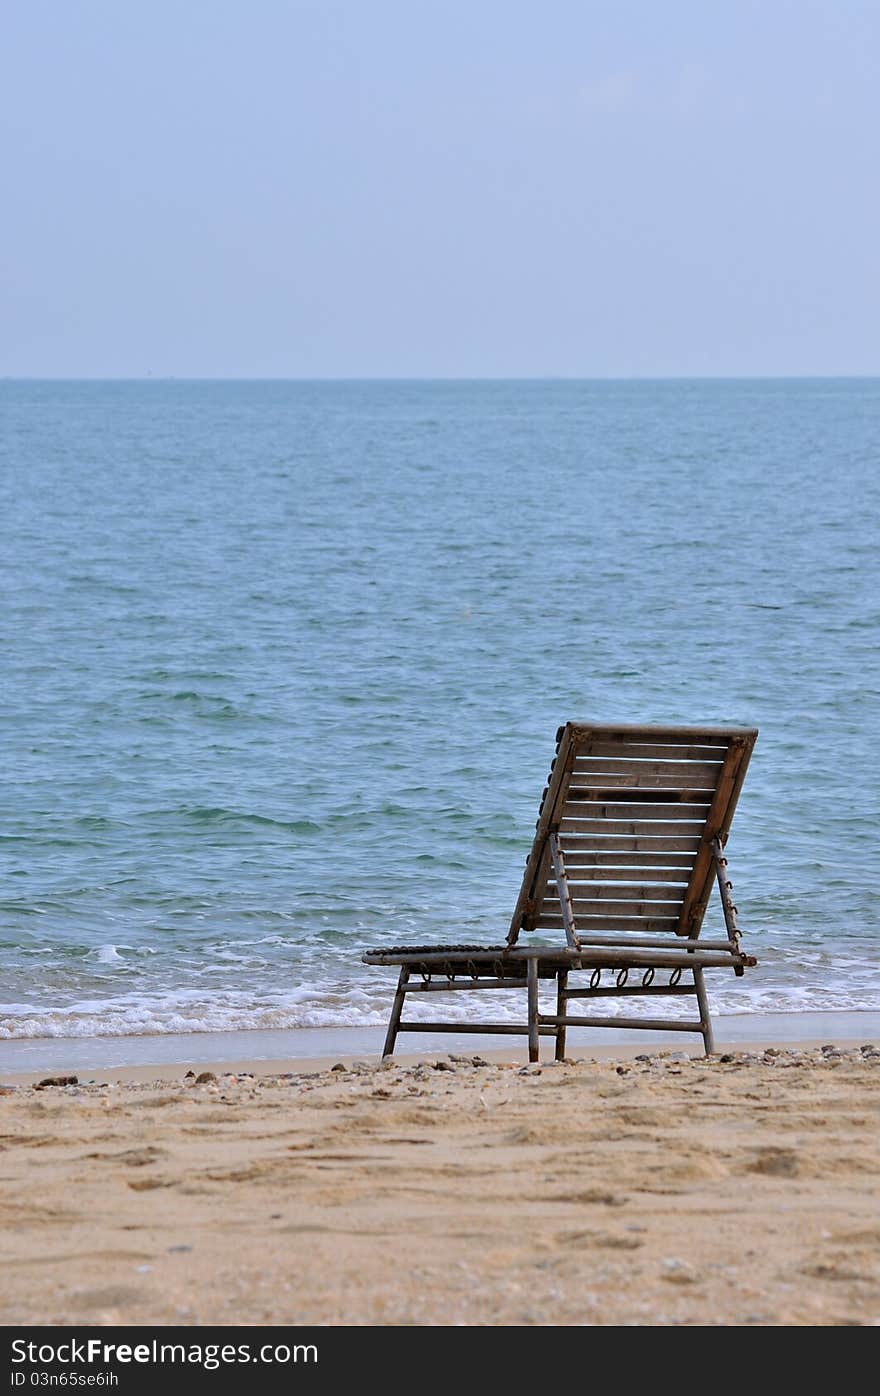 A rest chair on sand beach of sea, shown as spending holidy at sea beach or lonely and calmly stay. A rest chair on sand beach of sea, shown as spending holidy at sea beach or lonely and calmly stay.